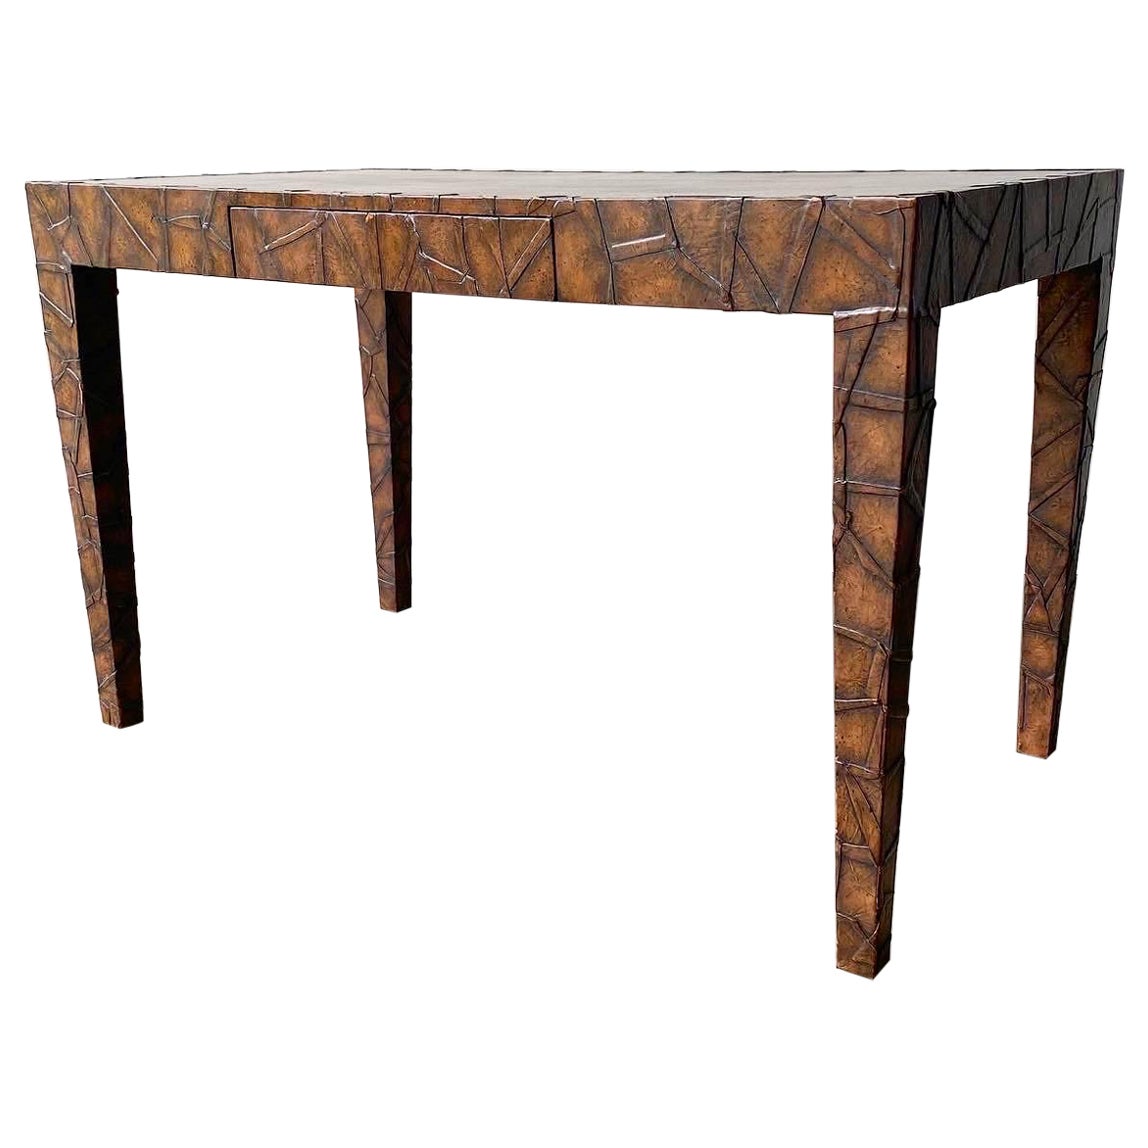 Maitland Smith style Tobacco Leaf Desk For Sale